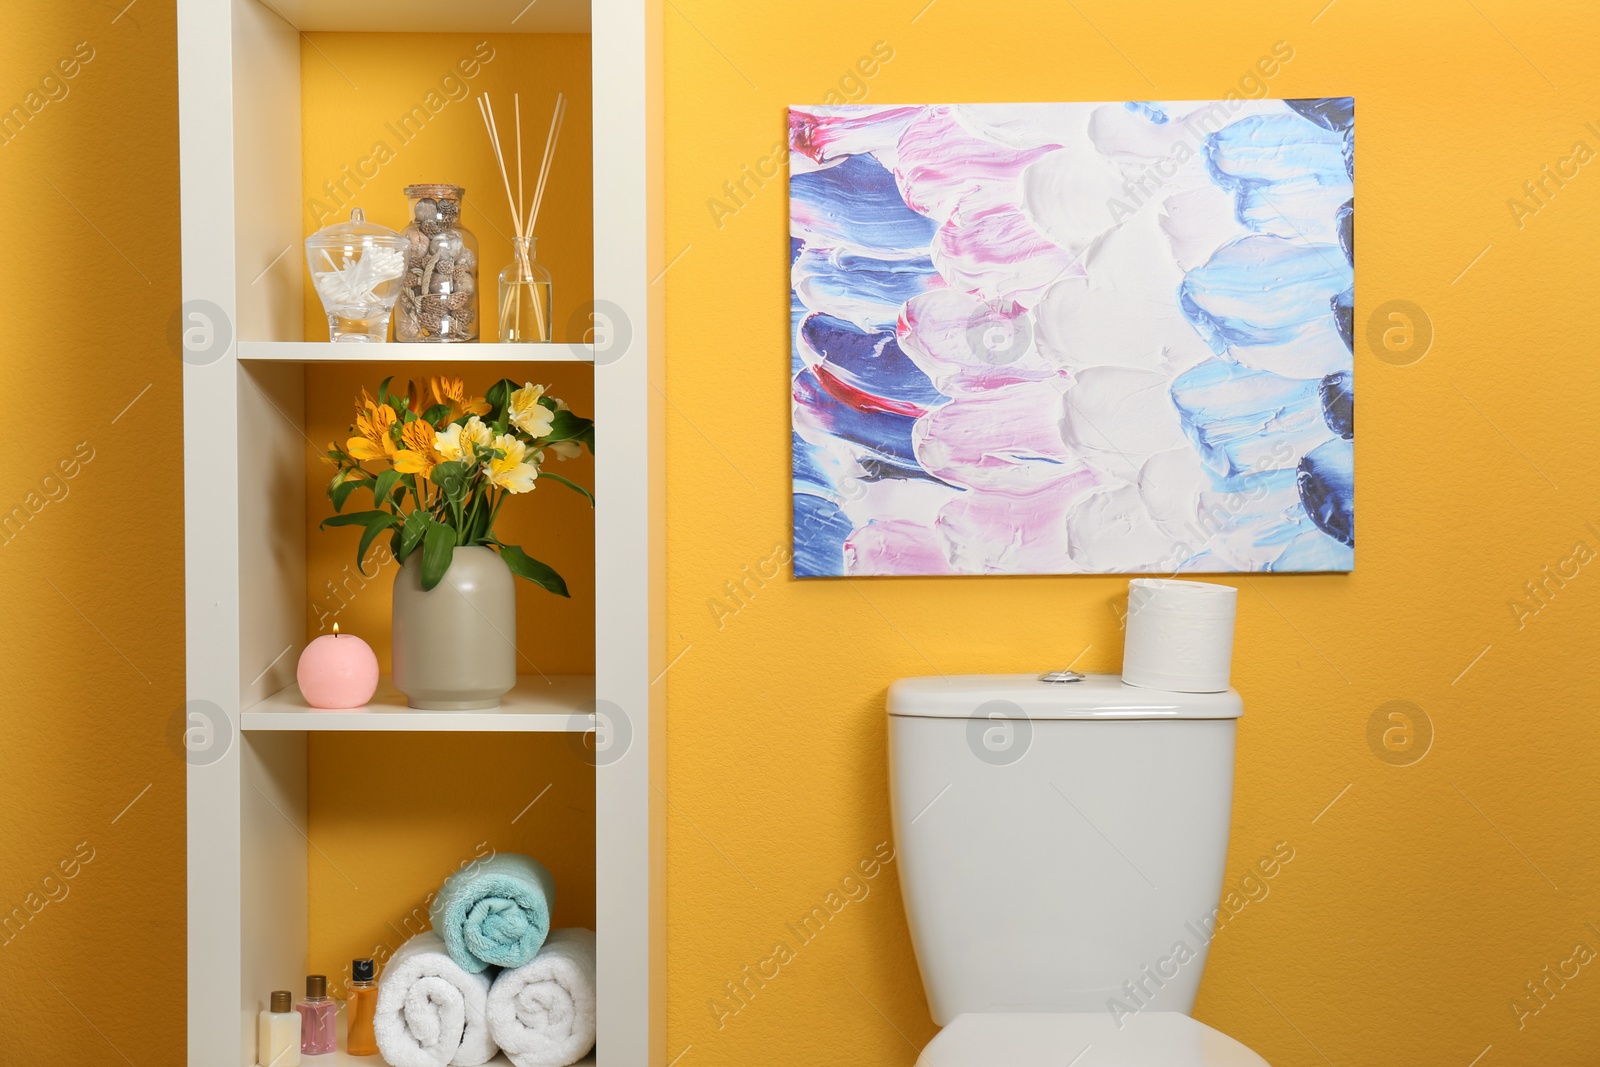 Photo of Shelves with different stuff above toilet bowl near orange wall in restroom interior